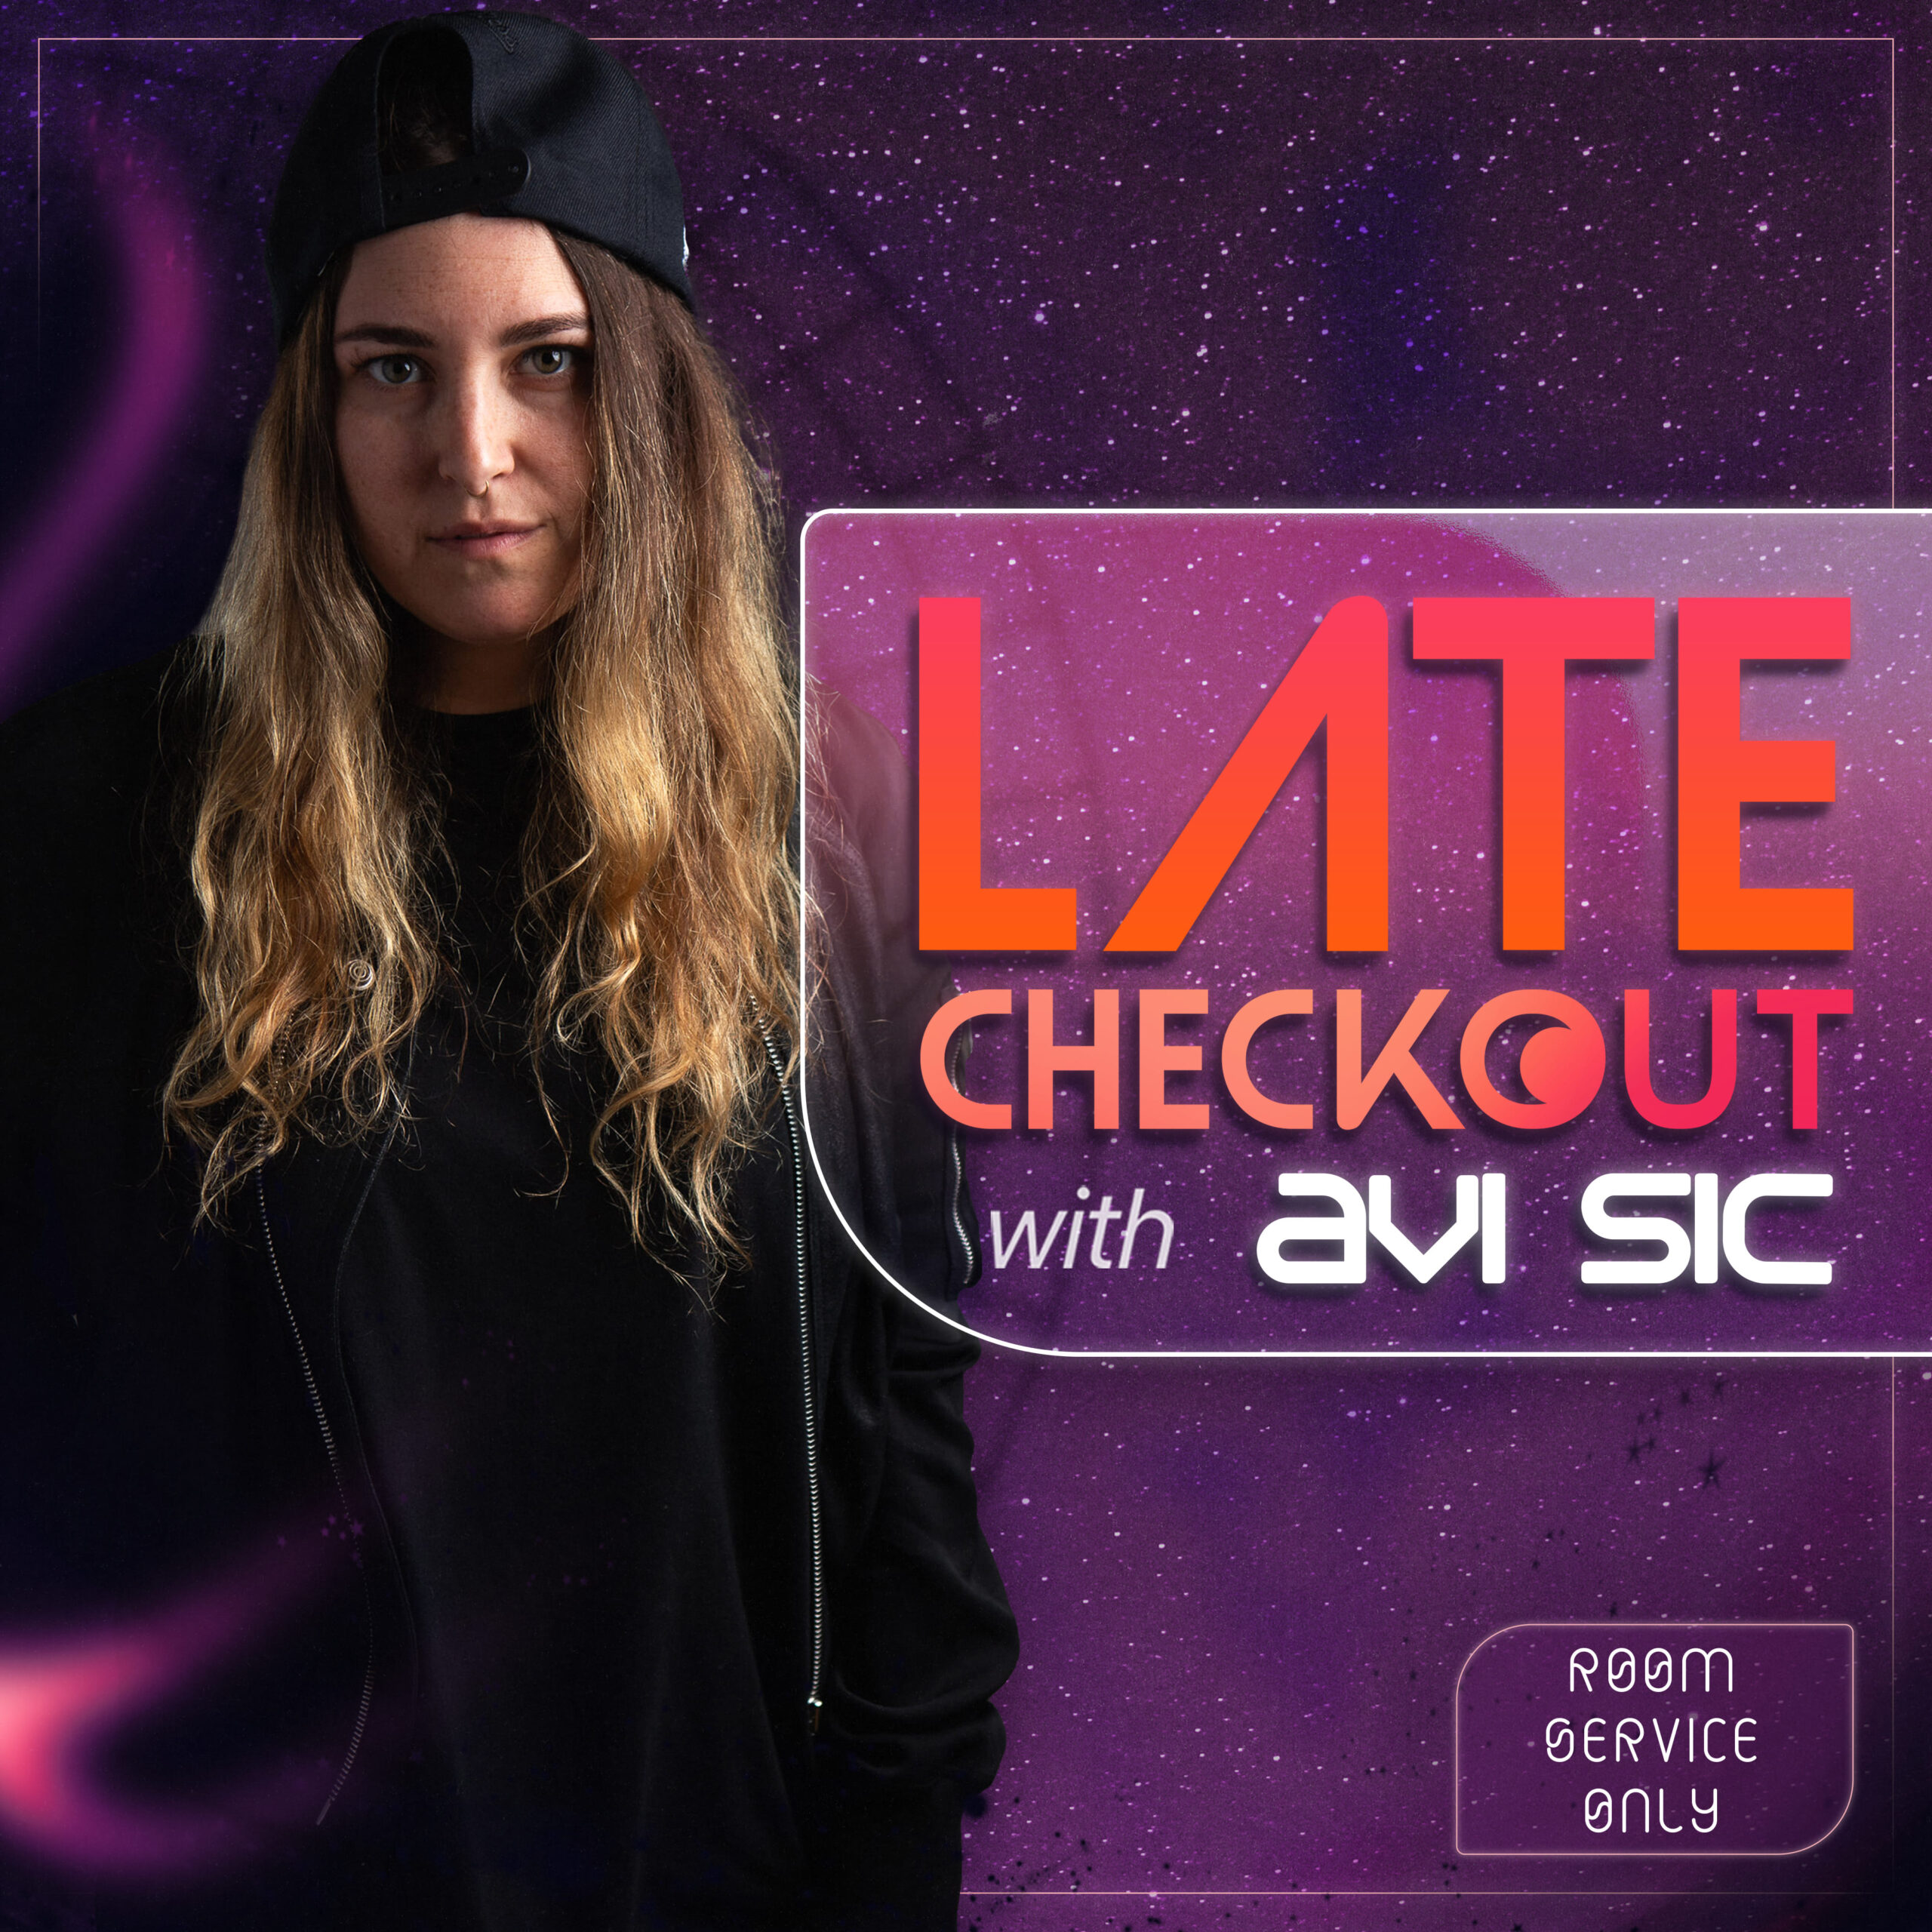 Experience the Electrifying Energy of Avi Sic’s ‘Late Checkout’ Radio Show